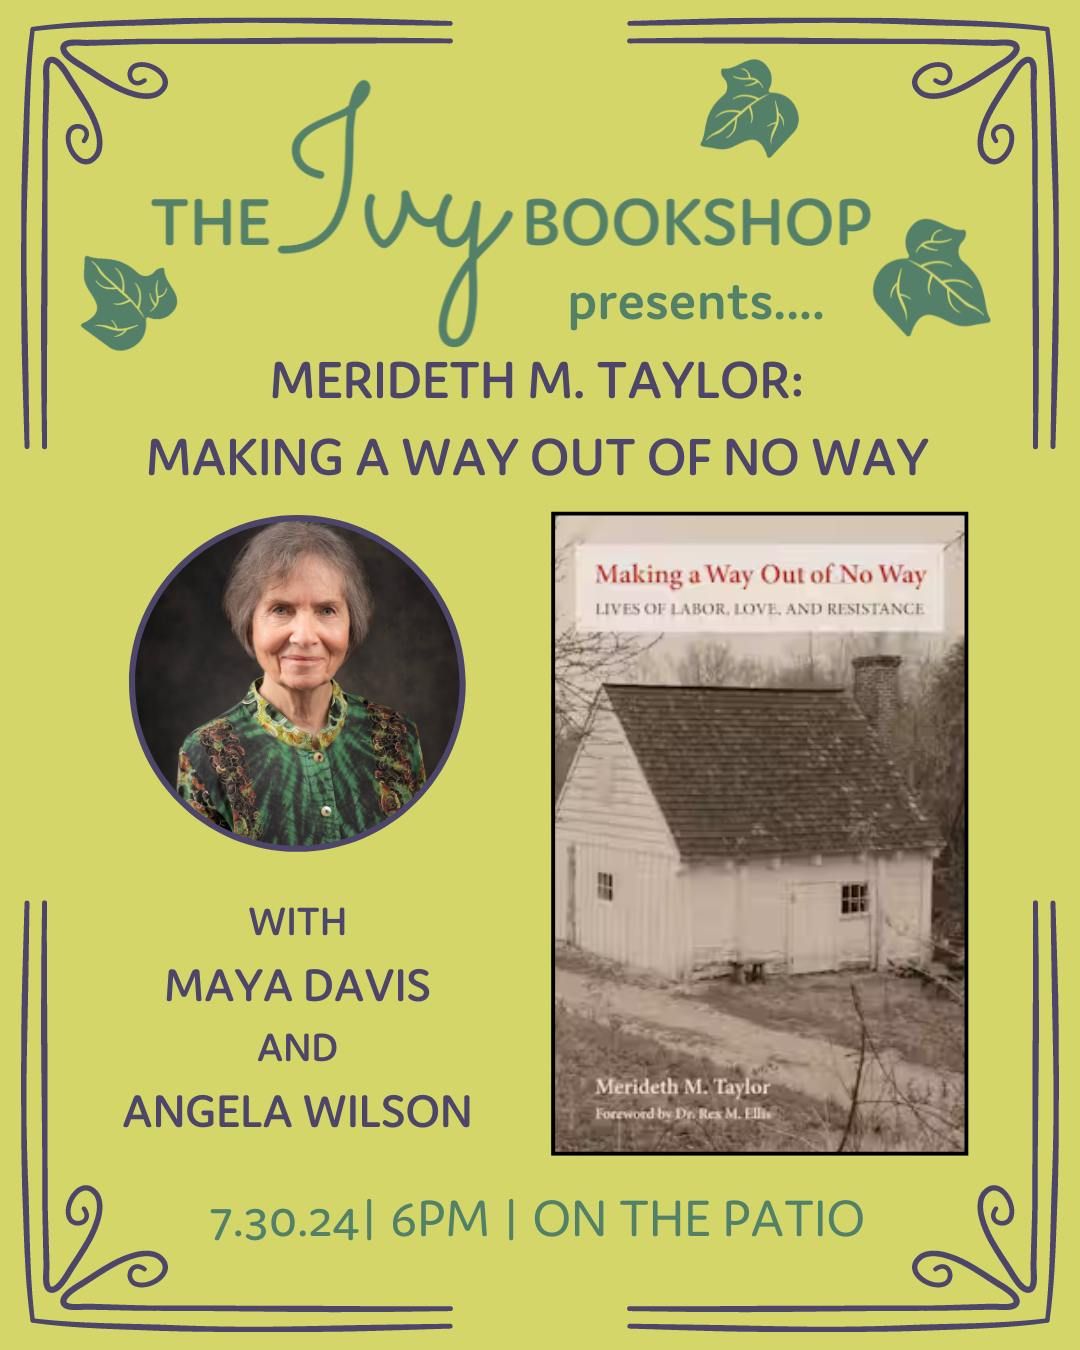 Merideth M. Taylor: MAKING A WAY OUT OF NO WAY: LIVES OF LABOR, LOVE, AND RESISTANCE